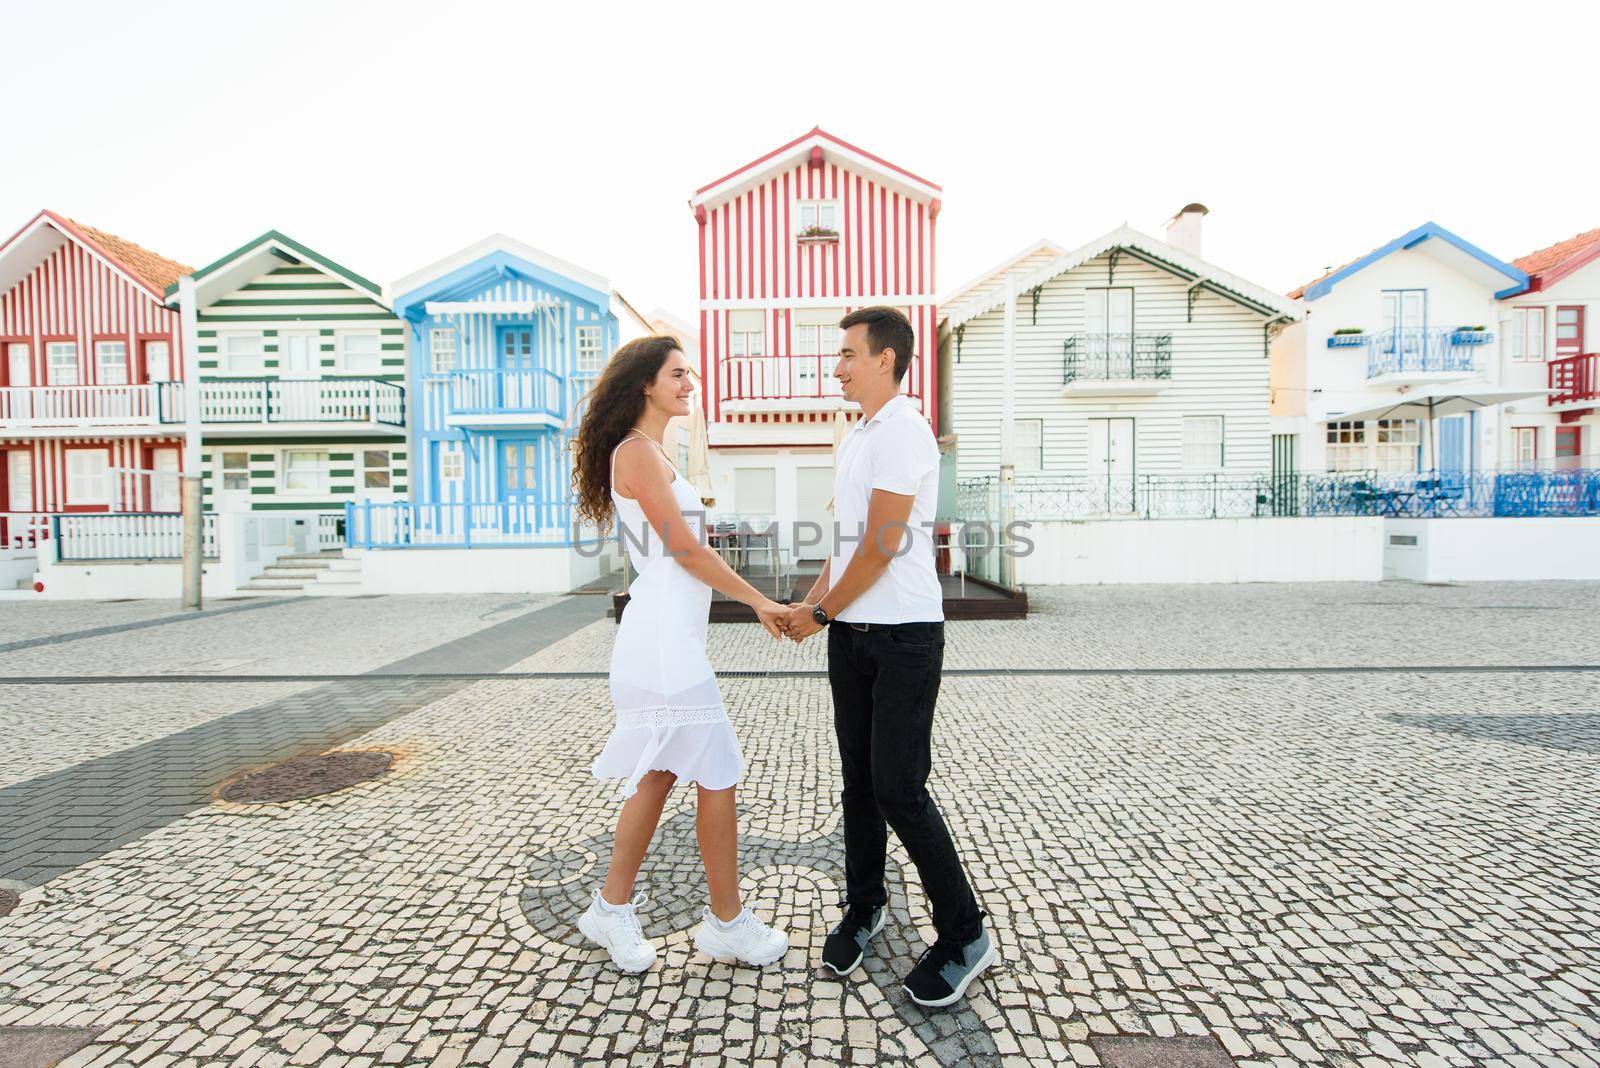 Love story of couple have dating and looks each others in Aveiro, Portugal near colourful and peaceful houses. Lifestyle. Having fun, laughs, smiles by Rabizo